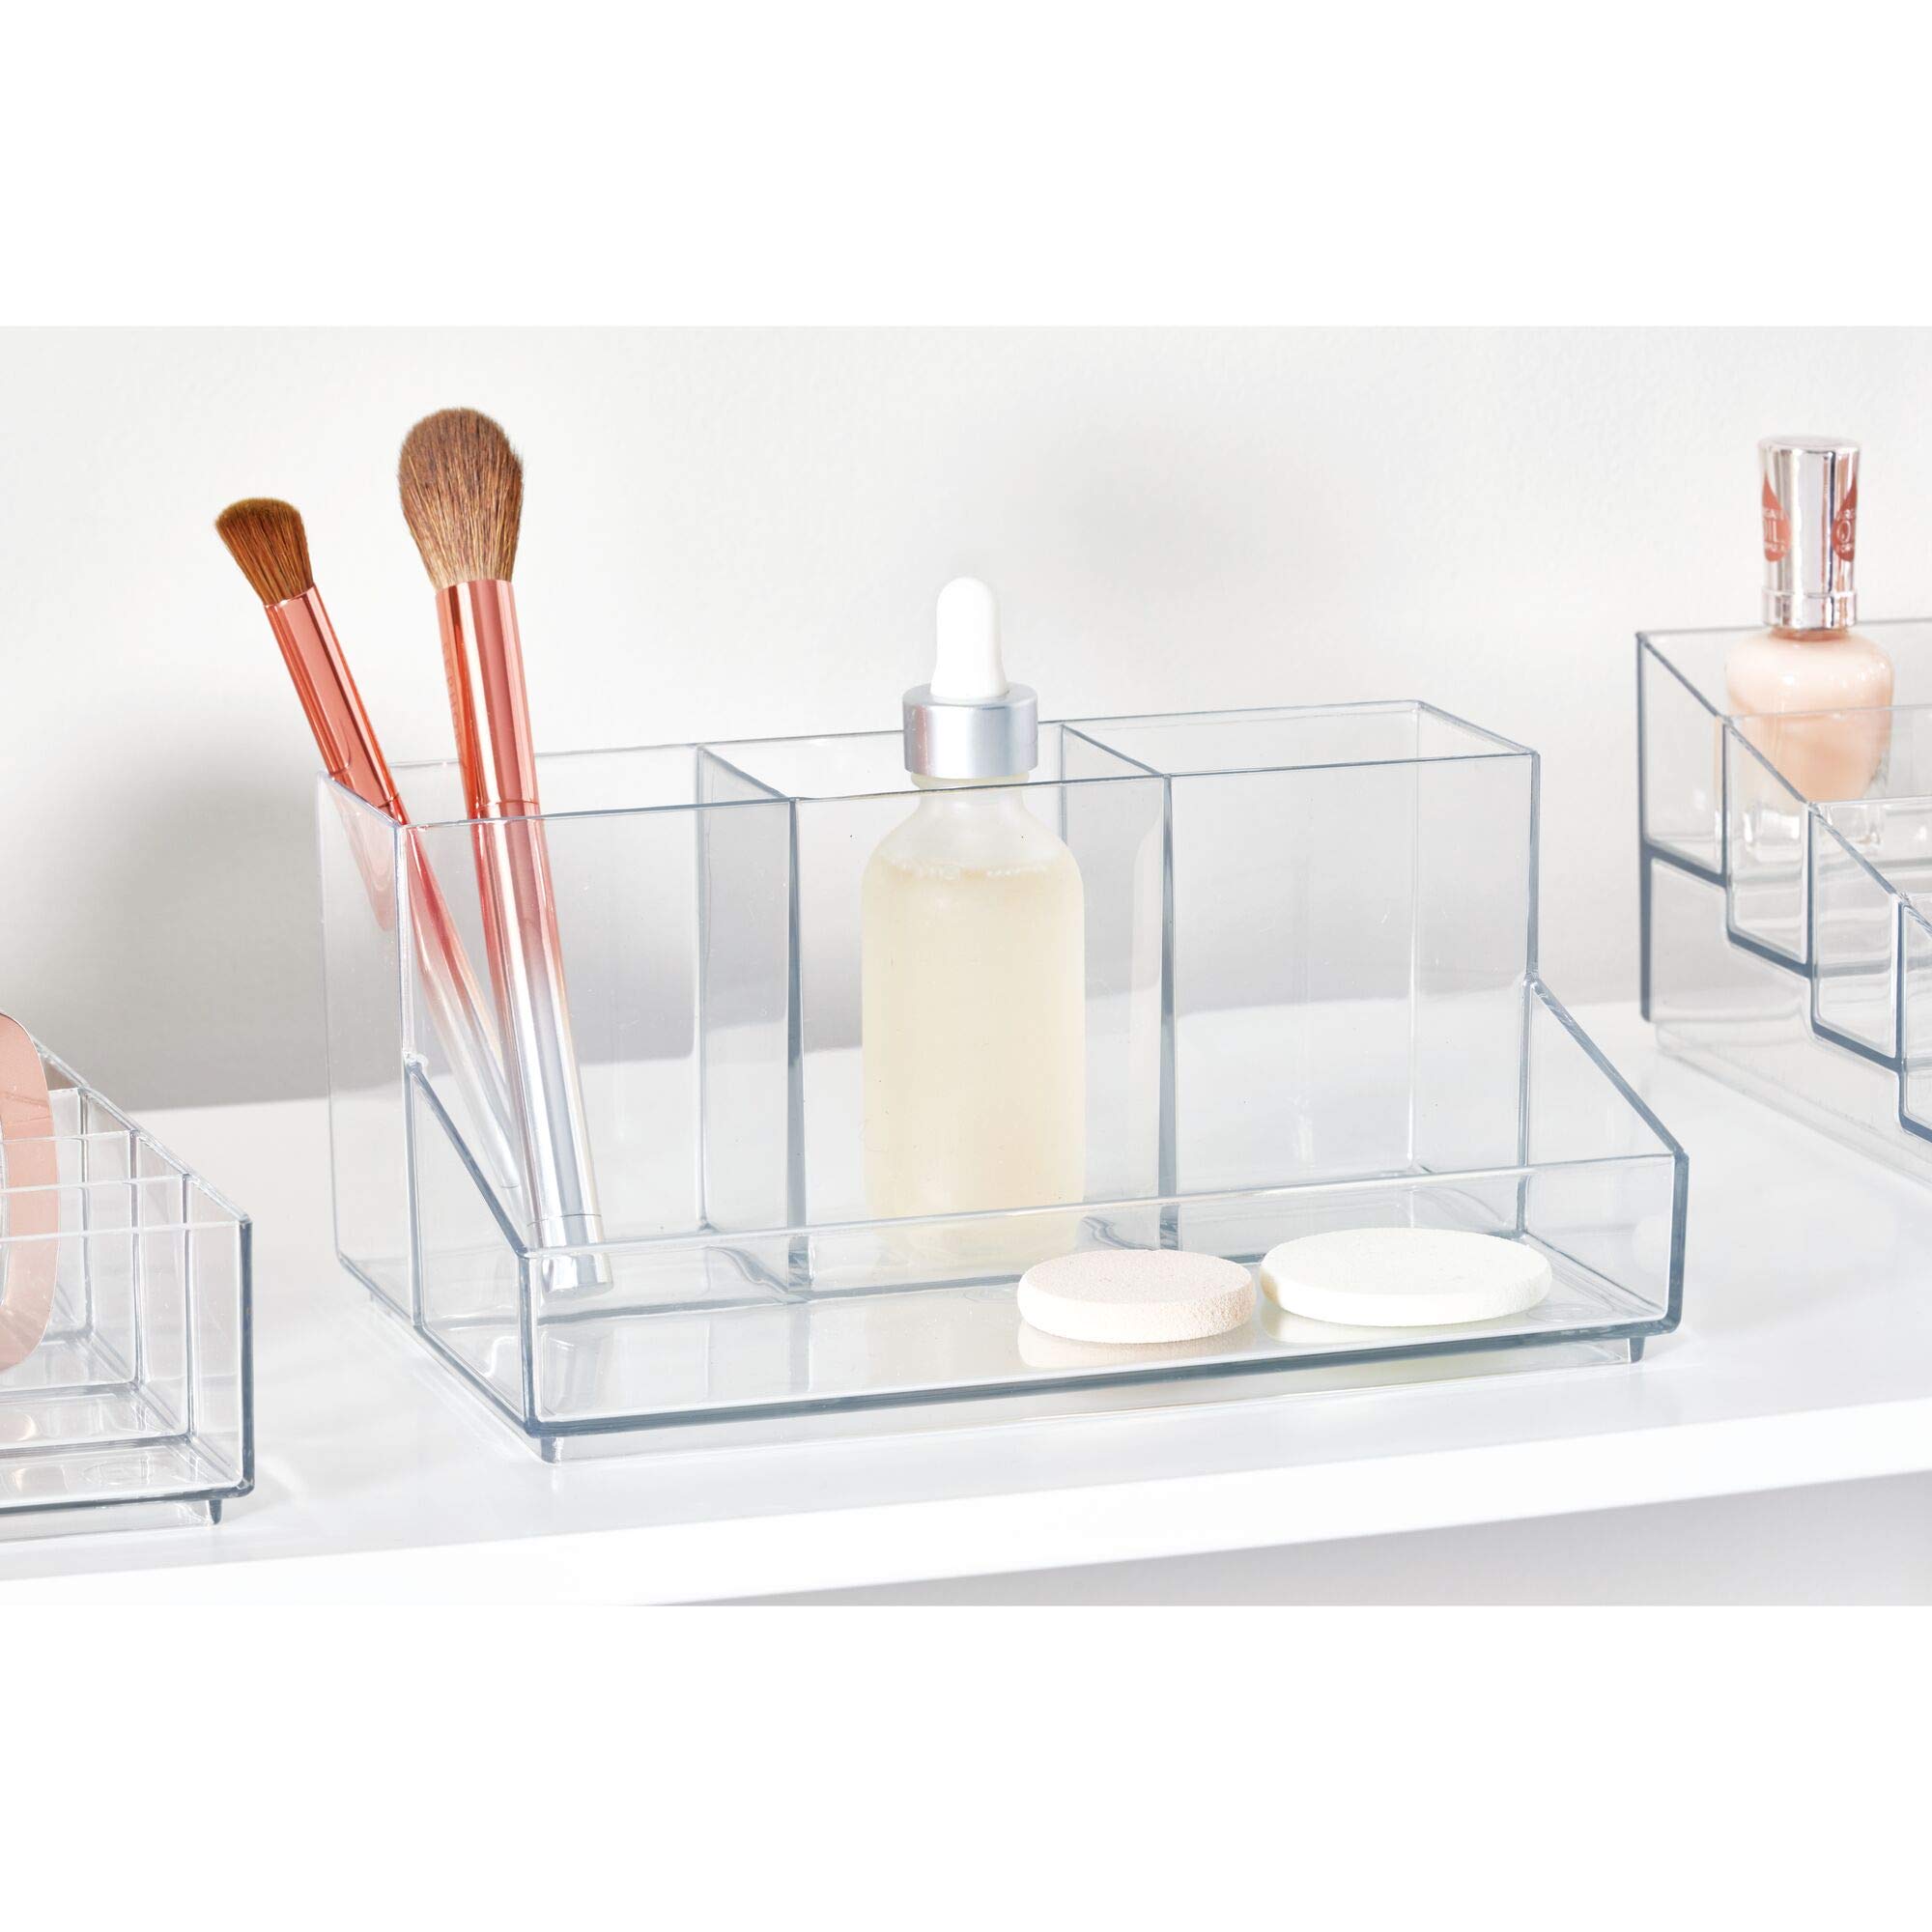 iDesign Cosmetic Organizer, 4 Section